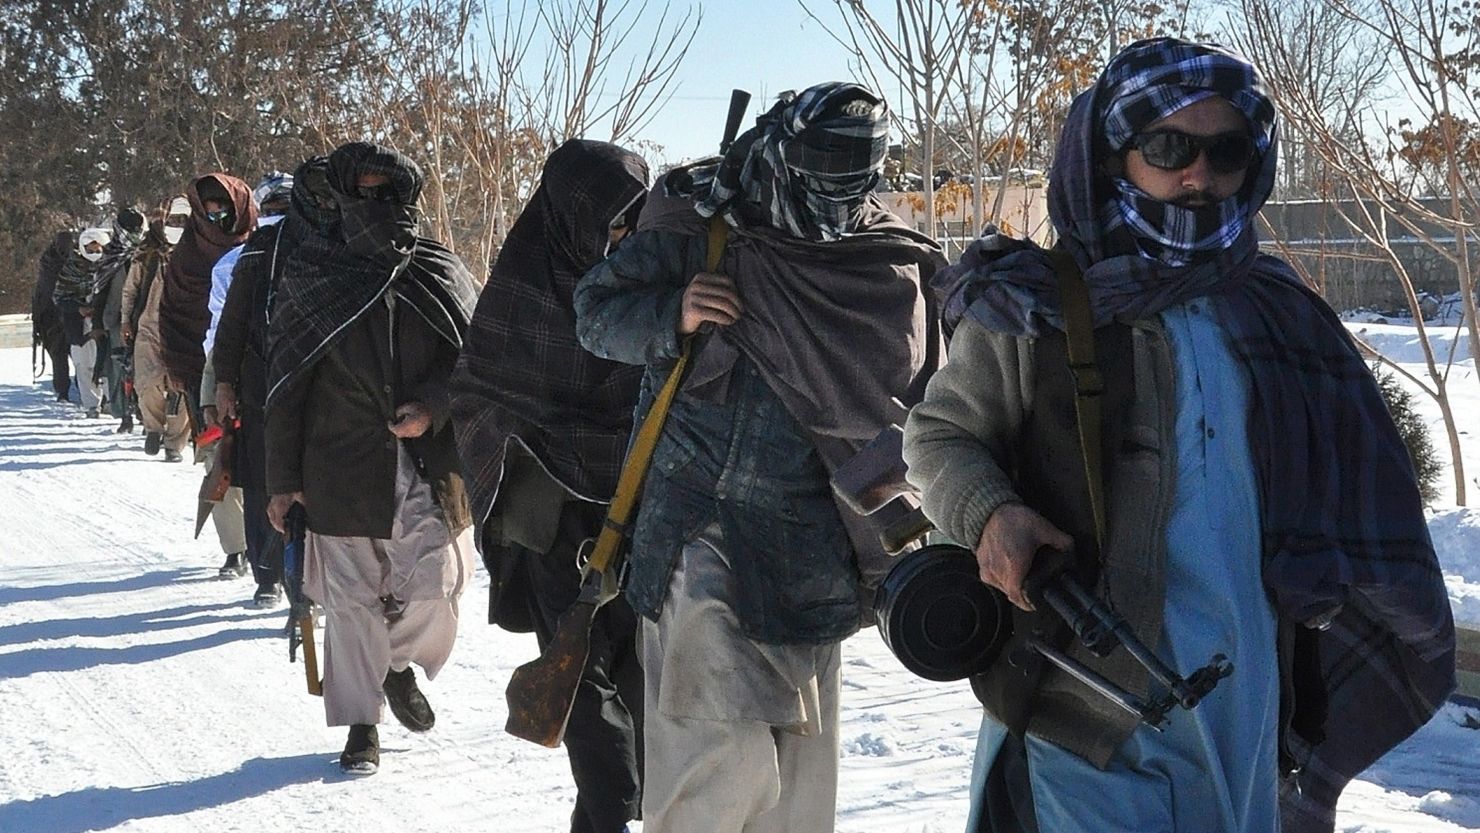 Taliban fighters are pictured after joining Afghan government forces for a ceremony in Ghazni province on January 16.